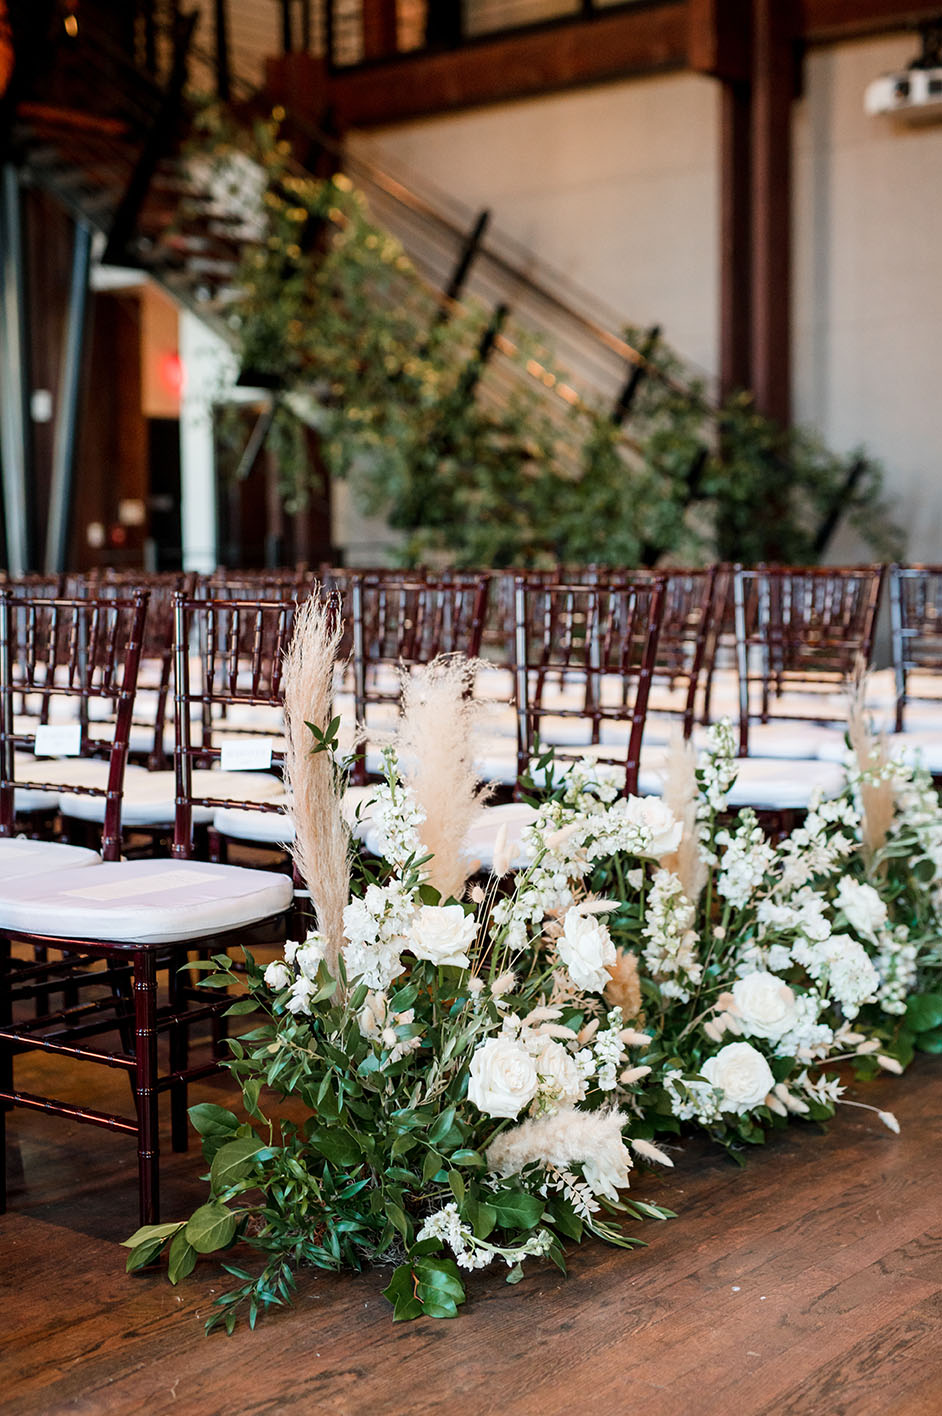 ceremony set up with greenery and boho florals lining the aisle